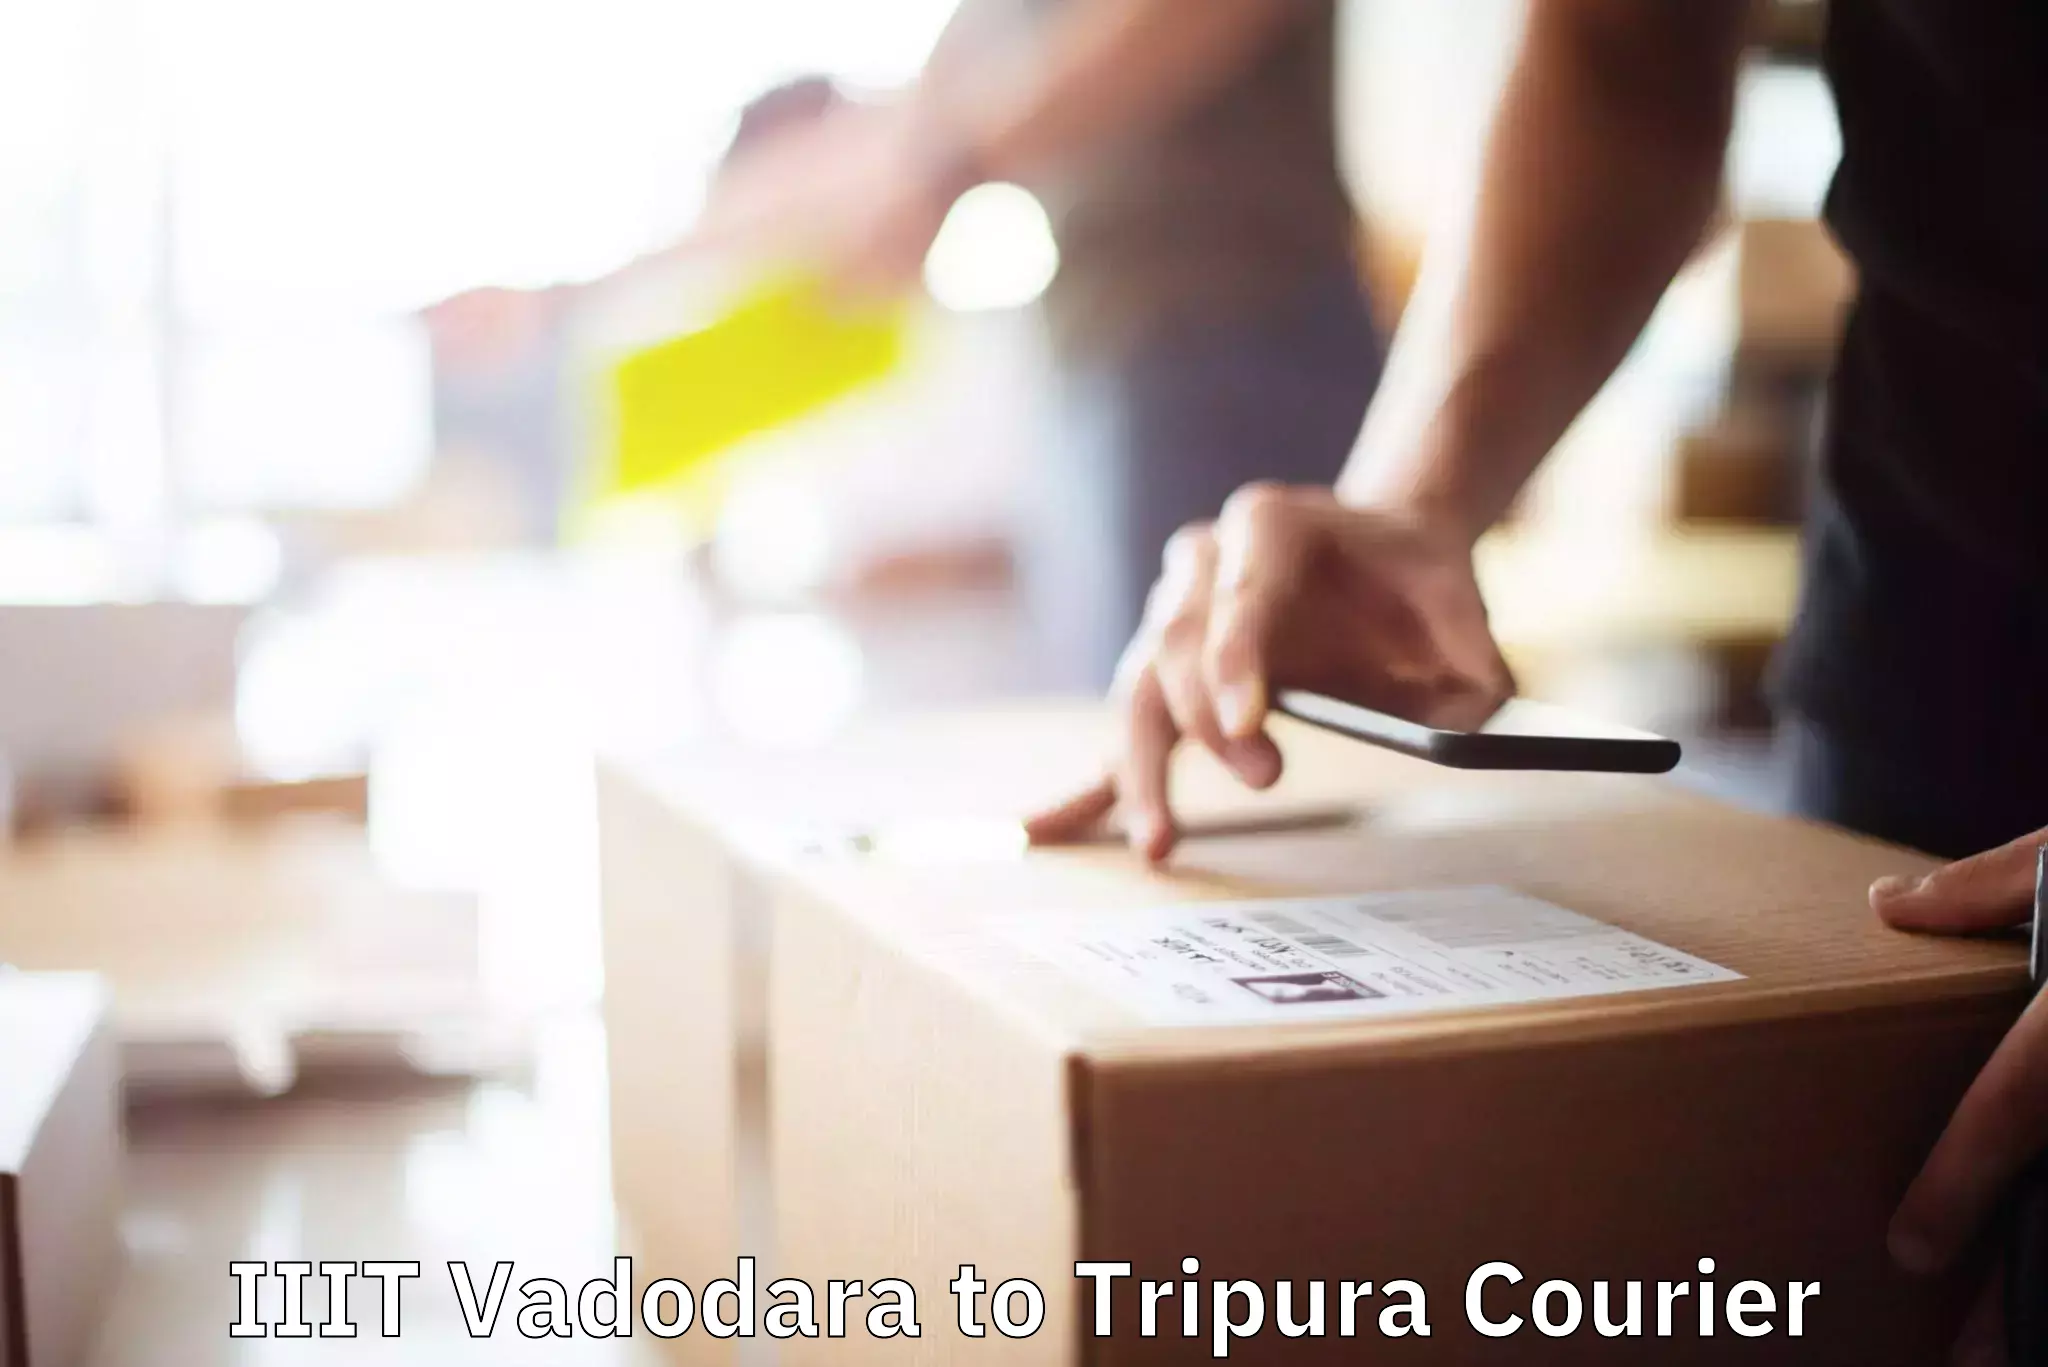 Quality relocation assistance IIIT Vadodara to Udaipur Tripura